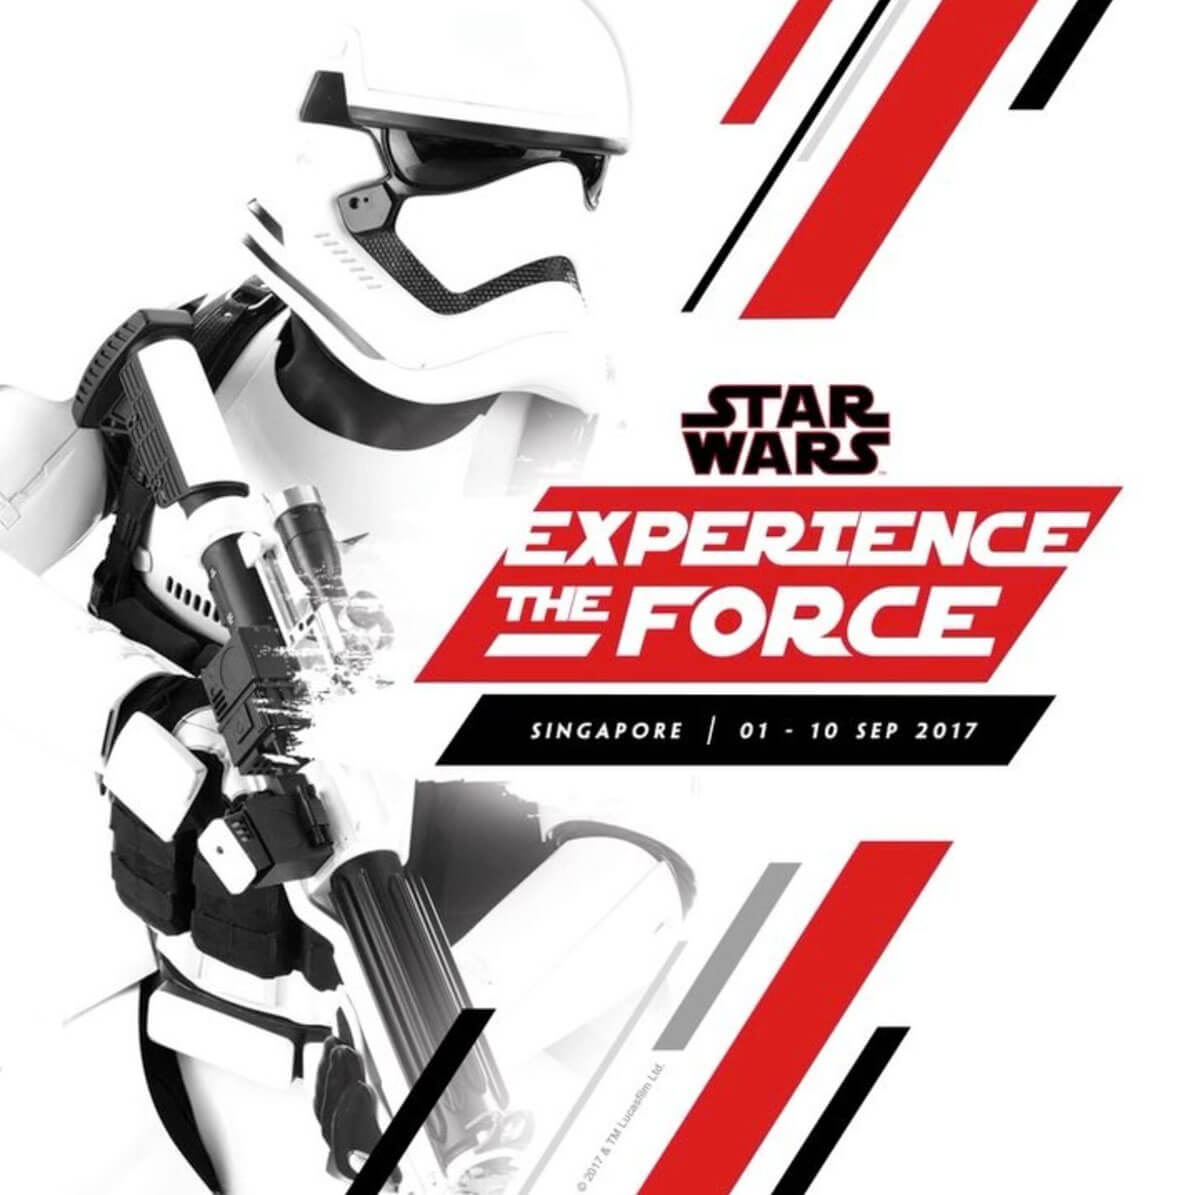 Star Wars - Experience The Force in SG